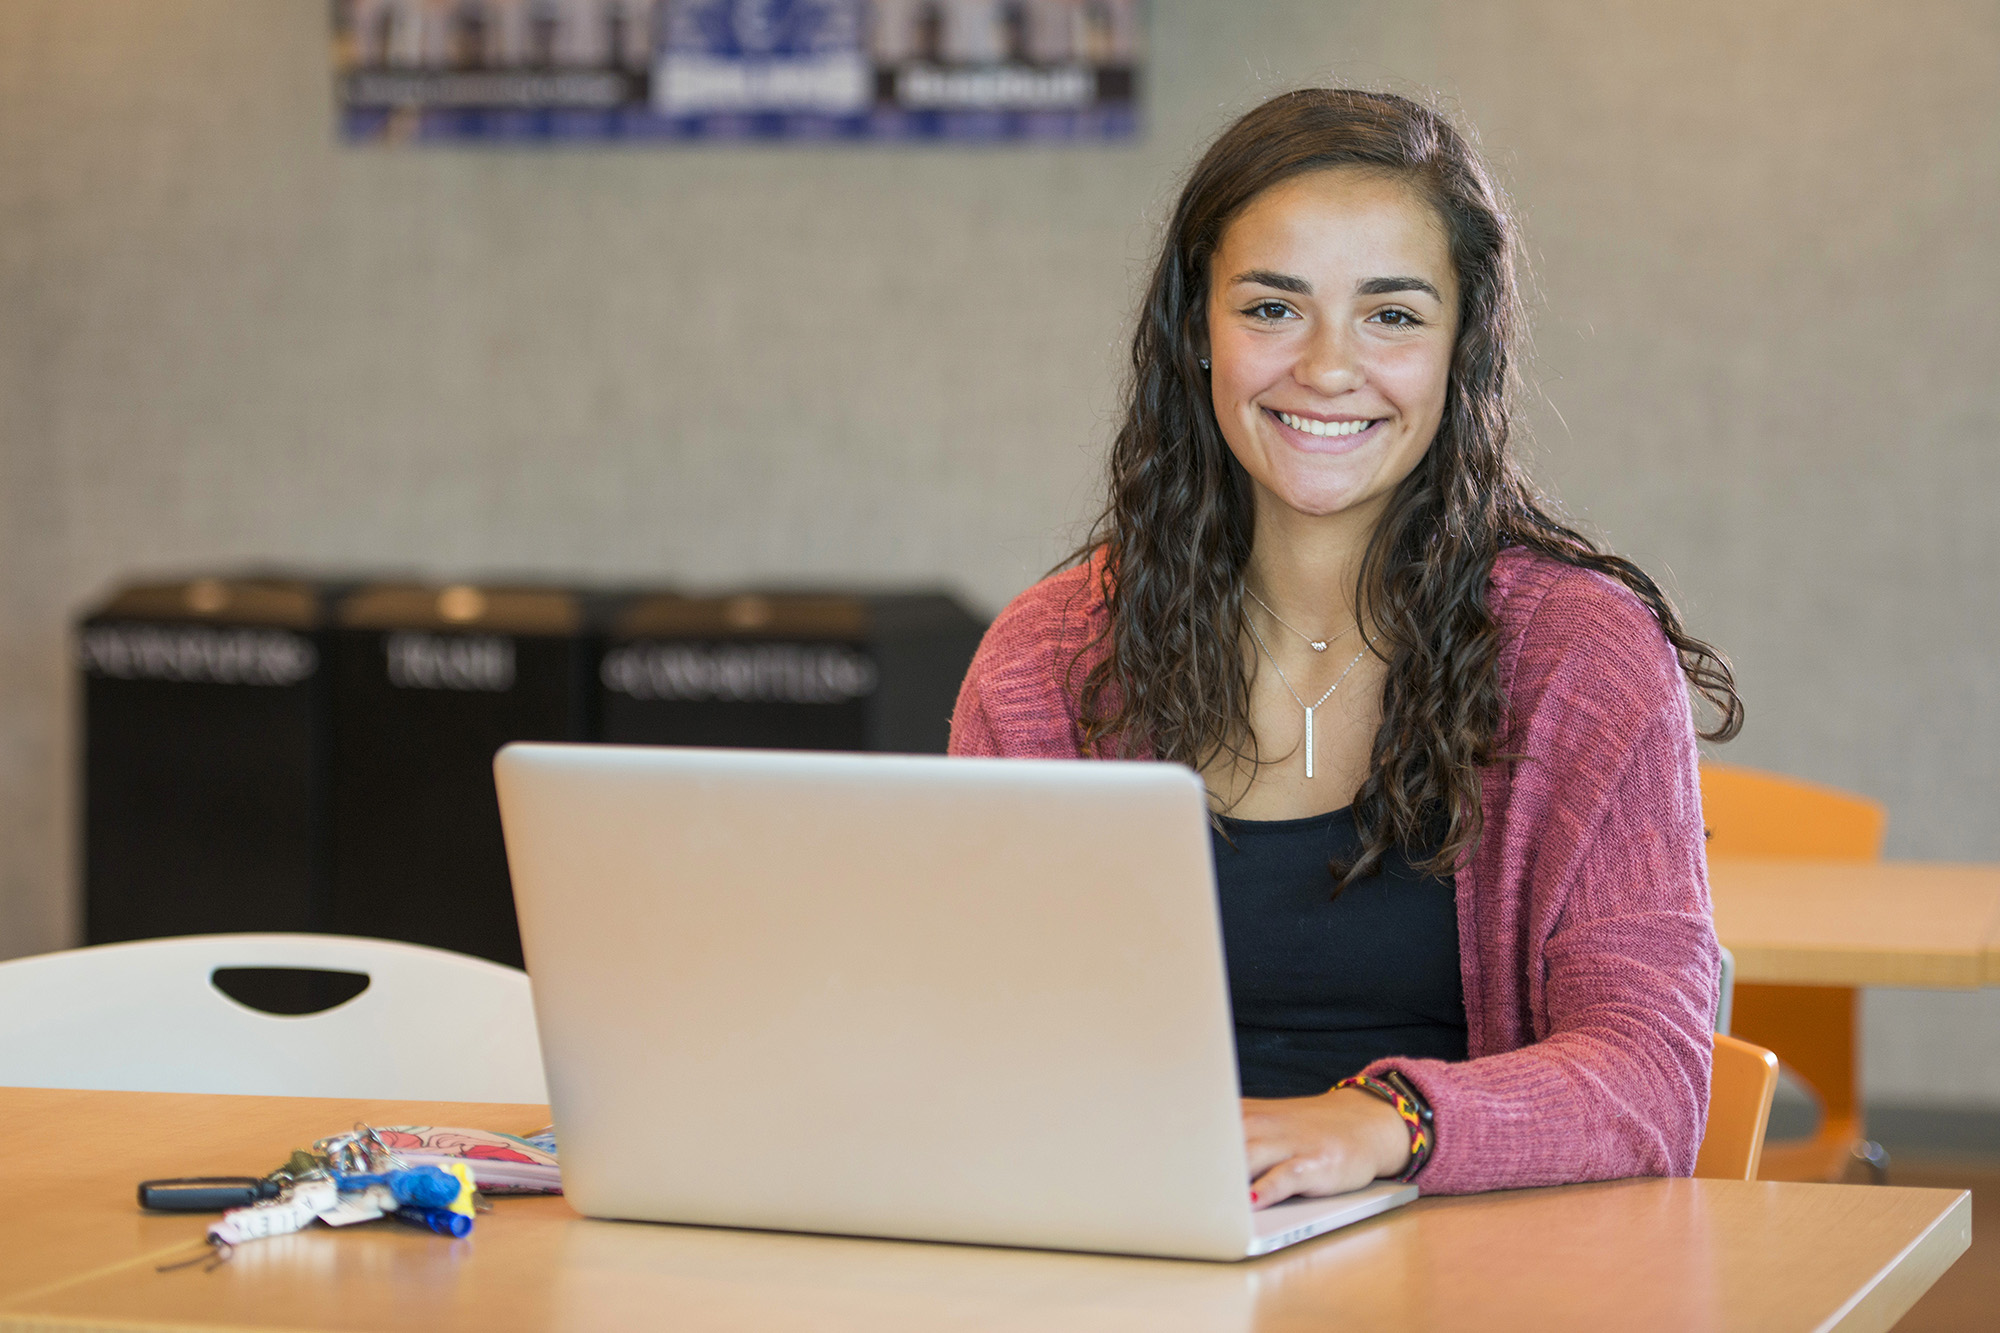 A student poses with a laptop in the Student Center.